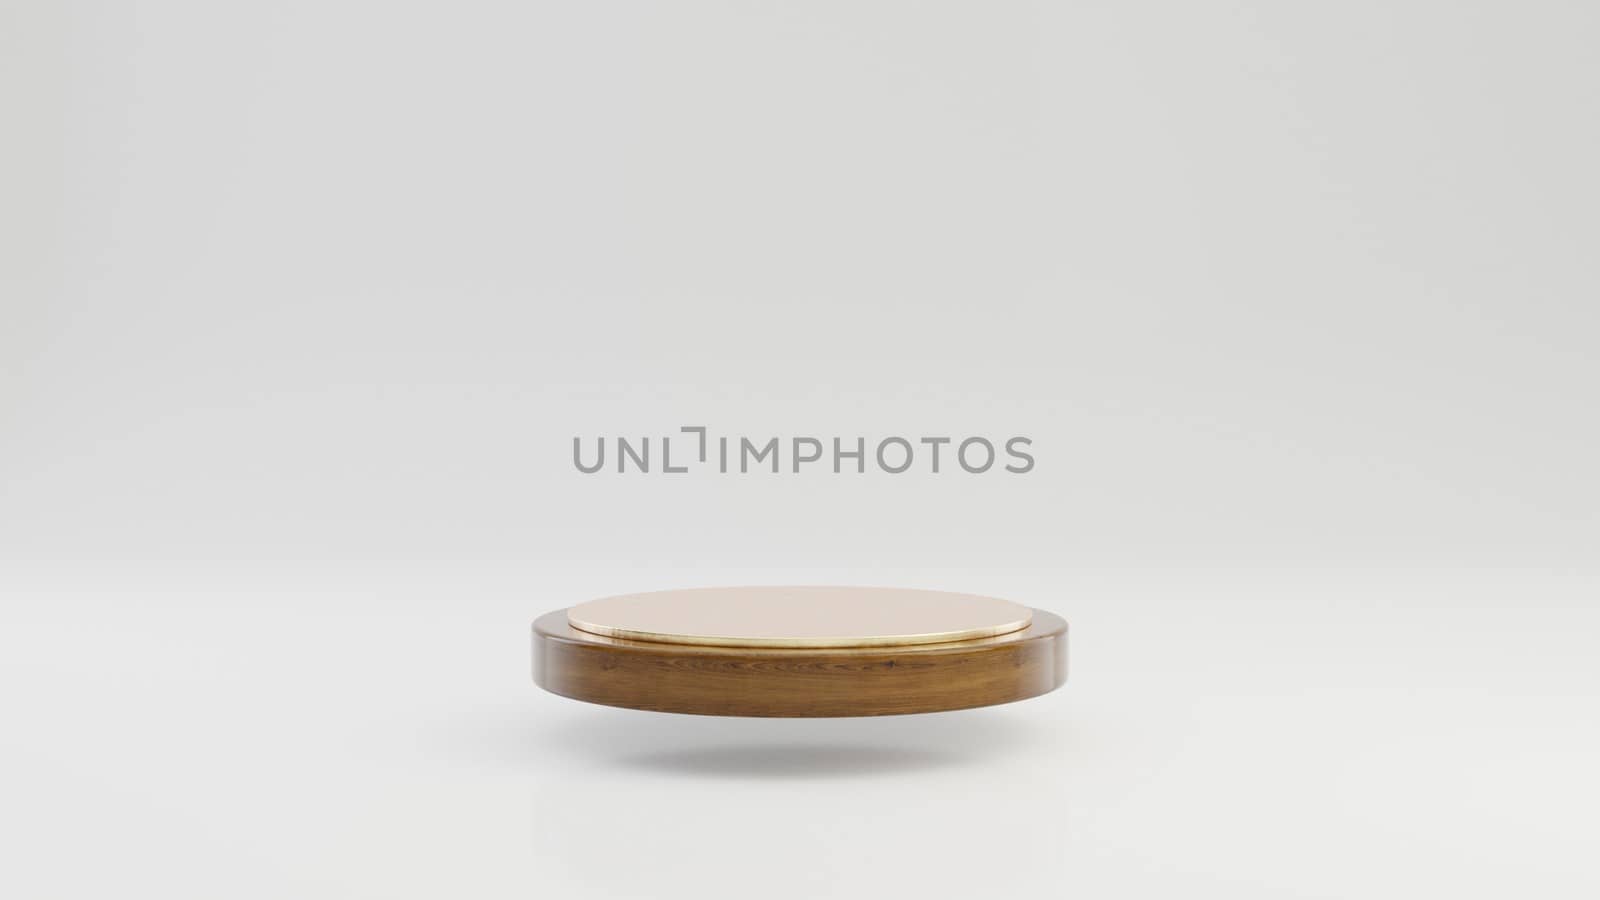 Levitating round wooden podium with gold top isolated on white background. 3d rendered minimalistic abstract background concept for product placement.